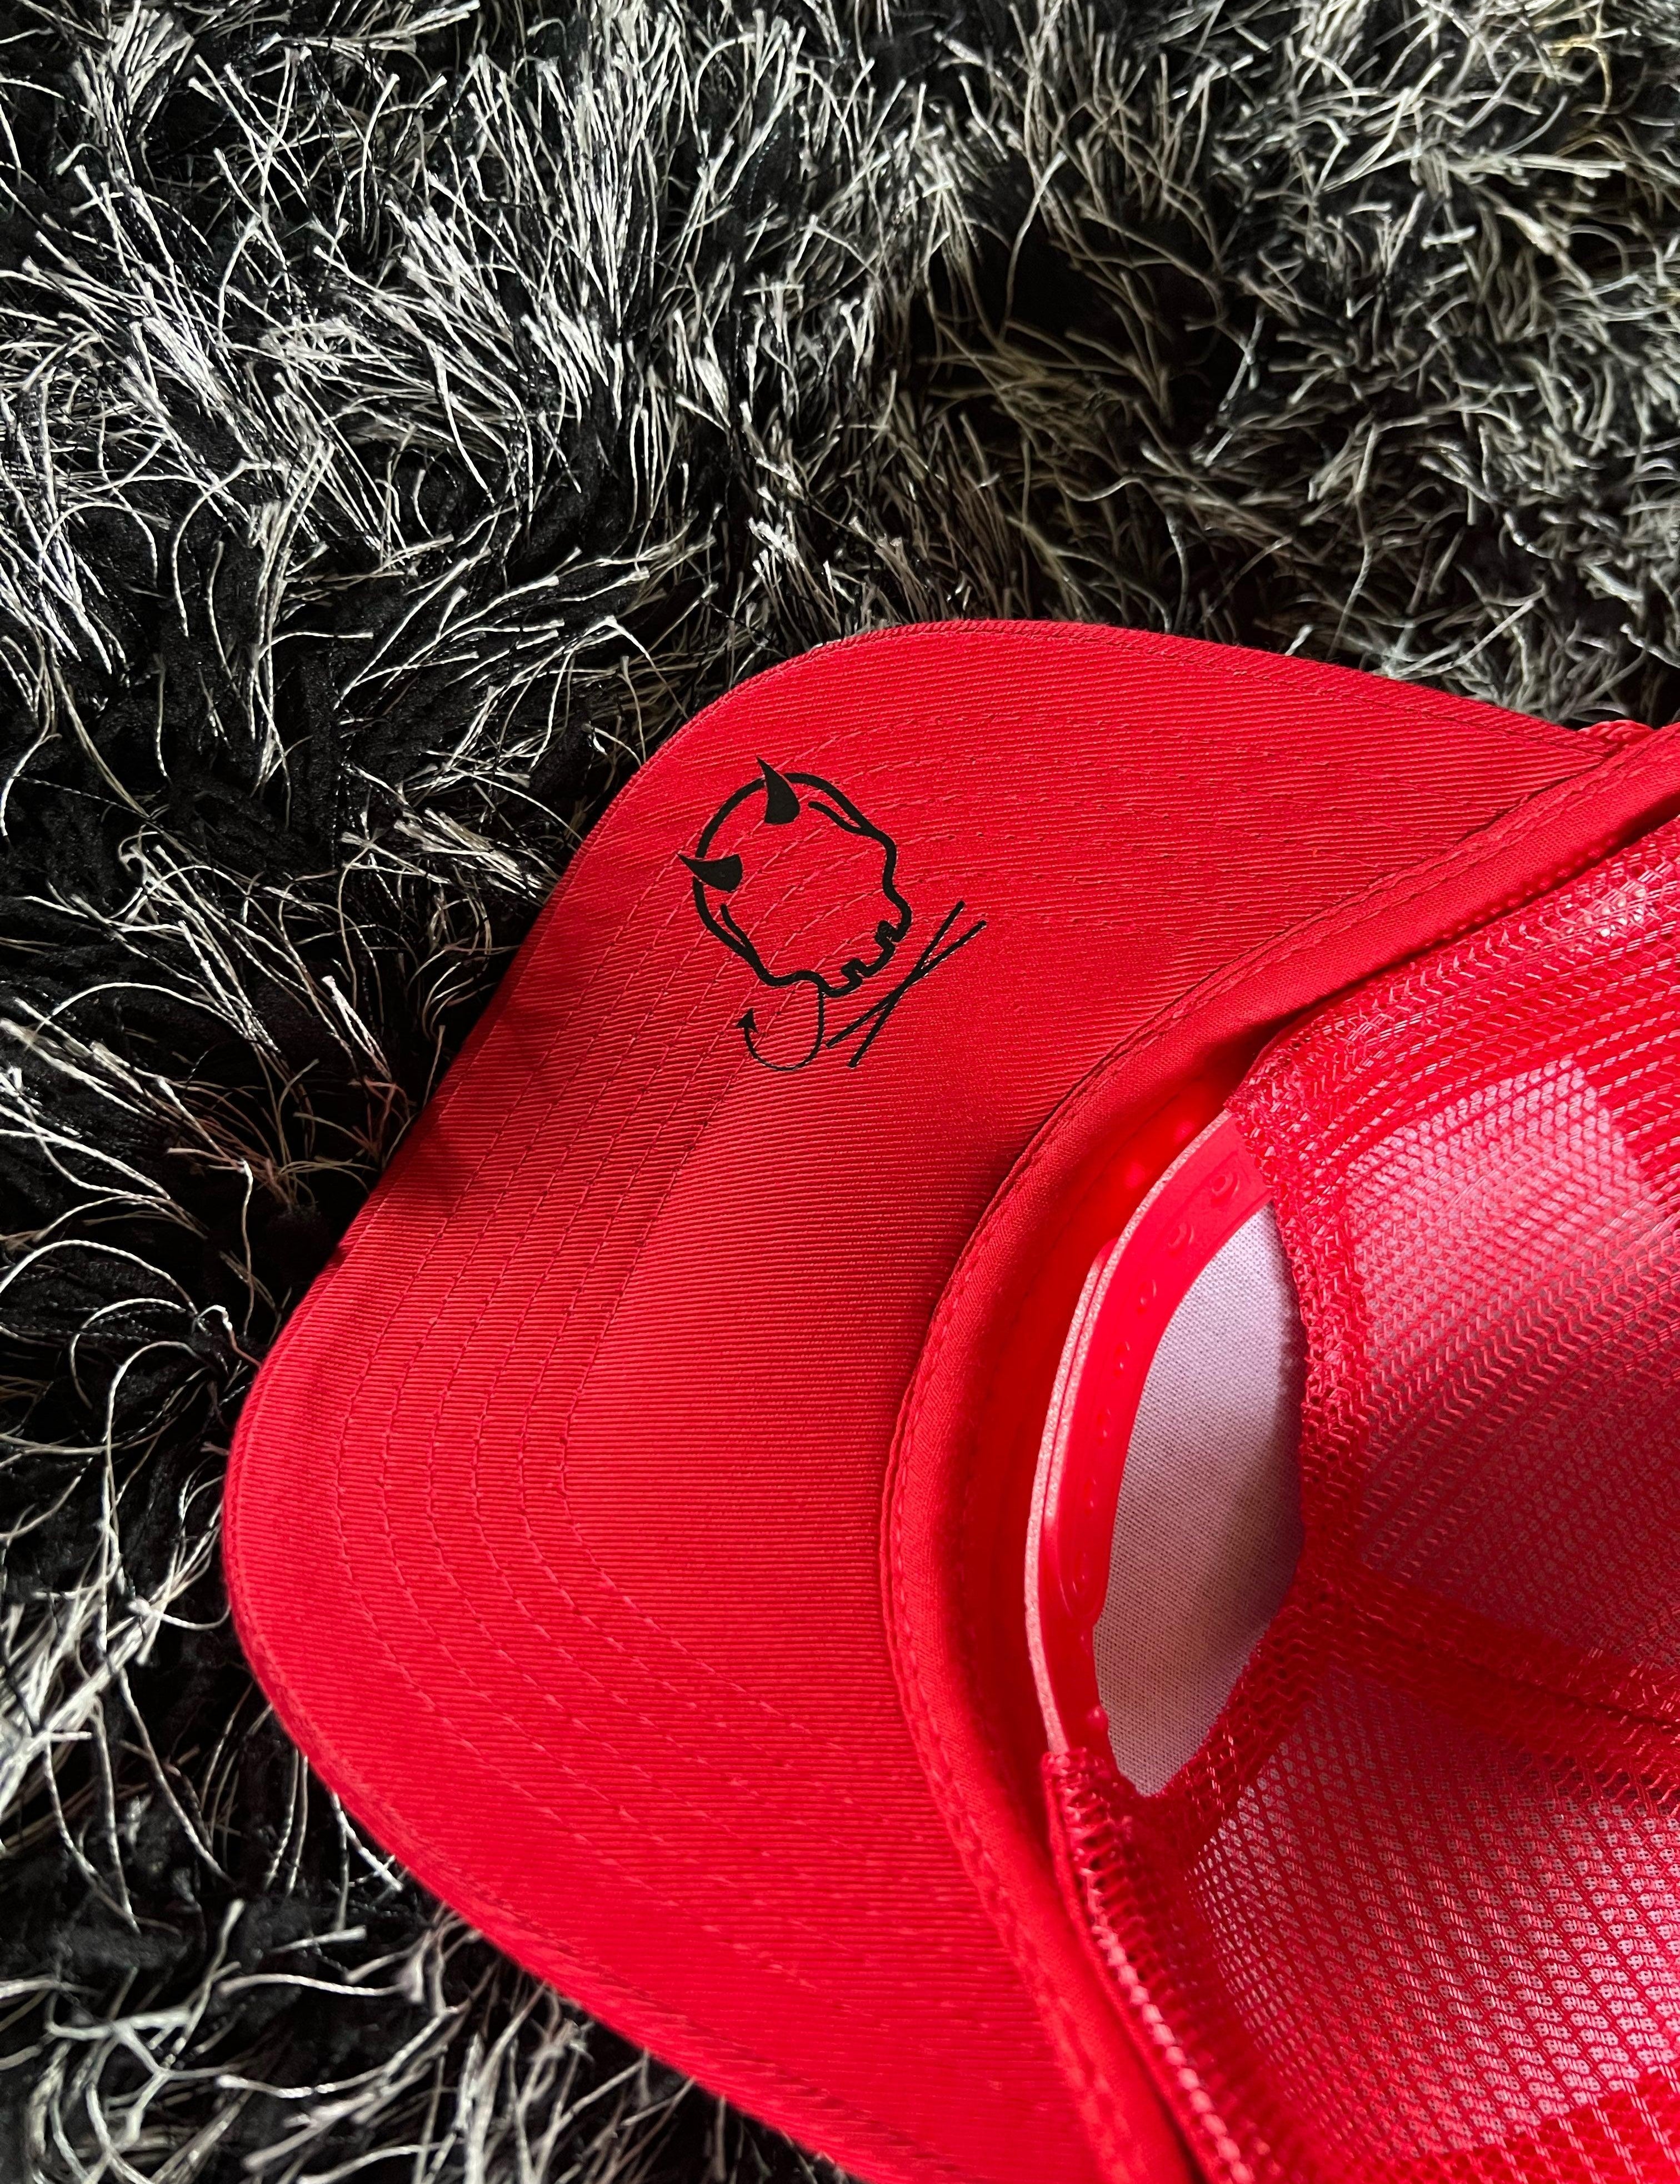 RAISING HELL CURVED BILL RED HAT - The Drive Clothing